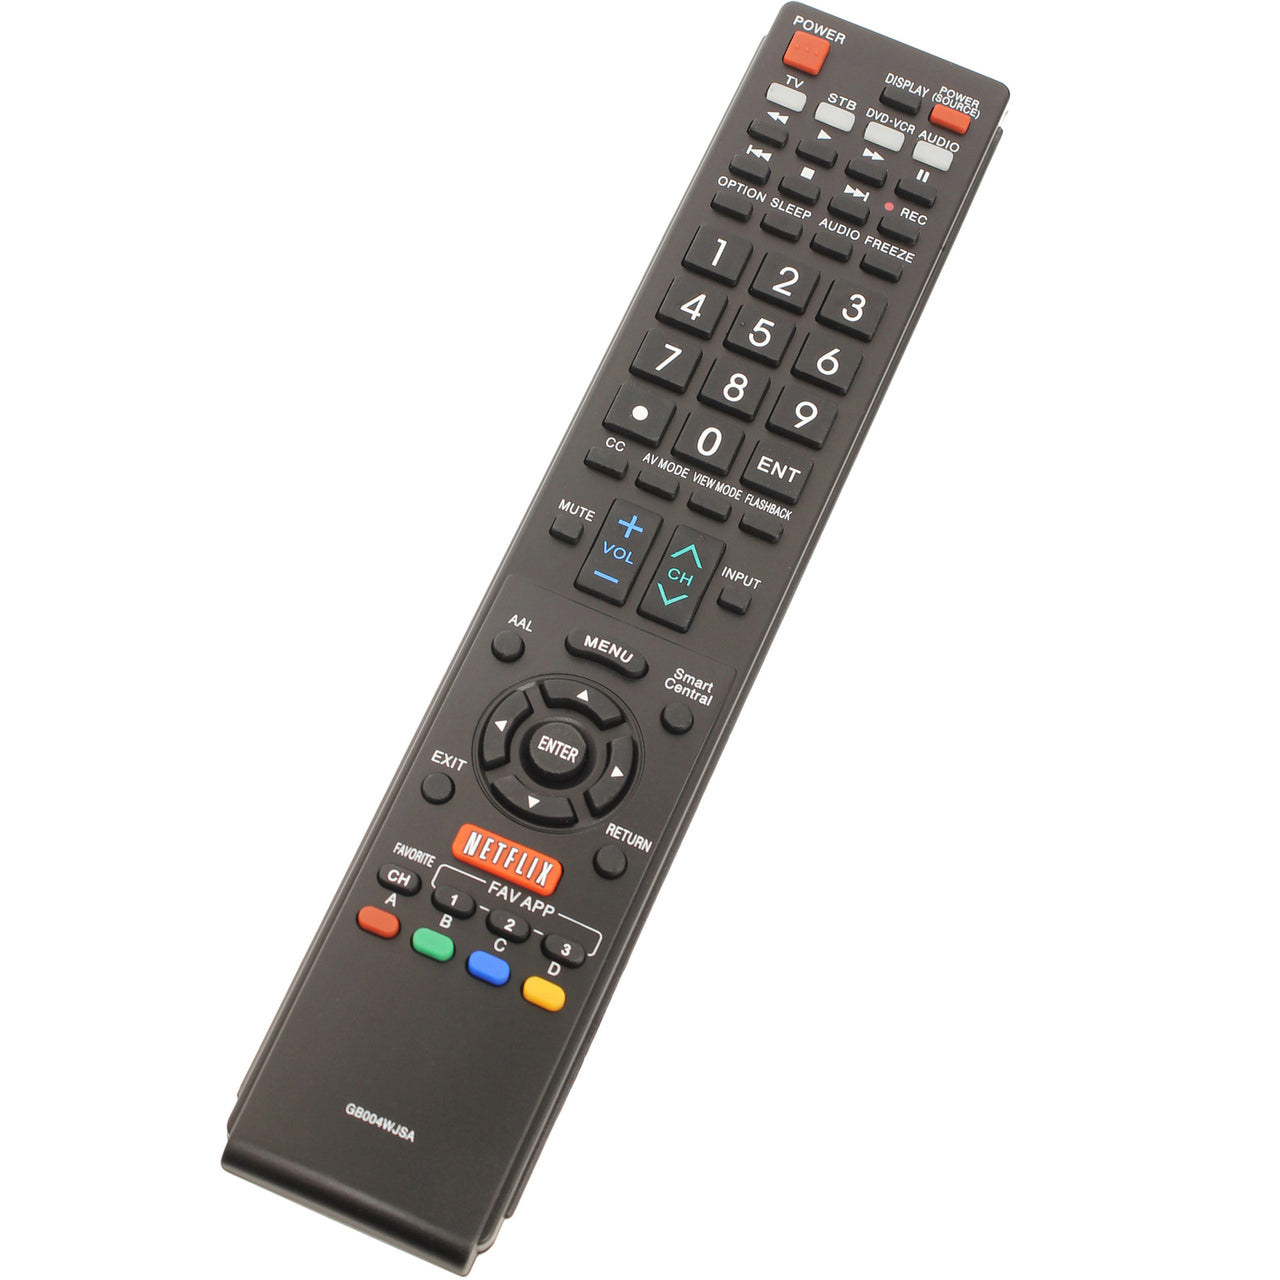 GB004WJSA Replacement Remote for Sharp Televisions